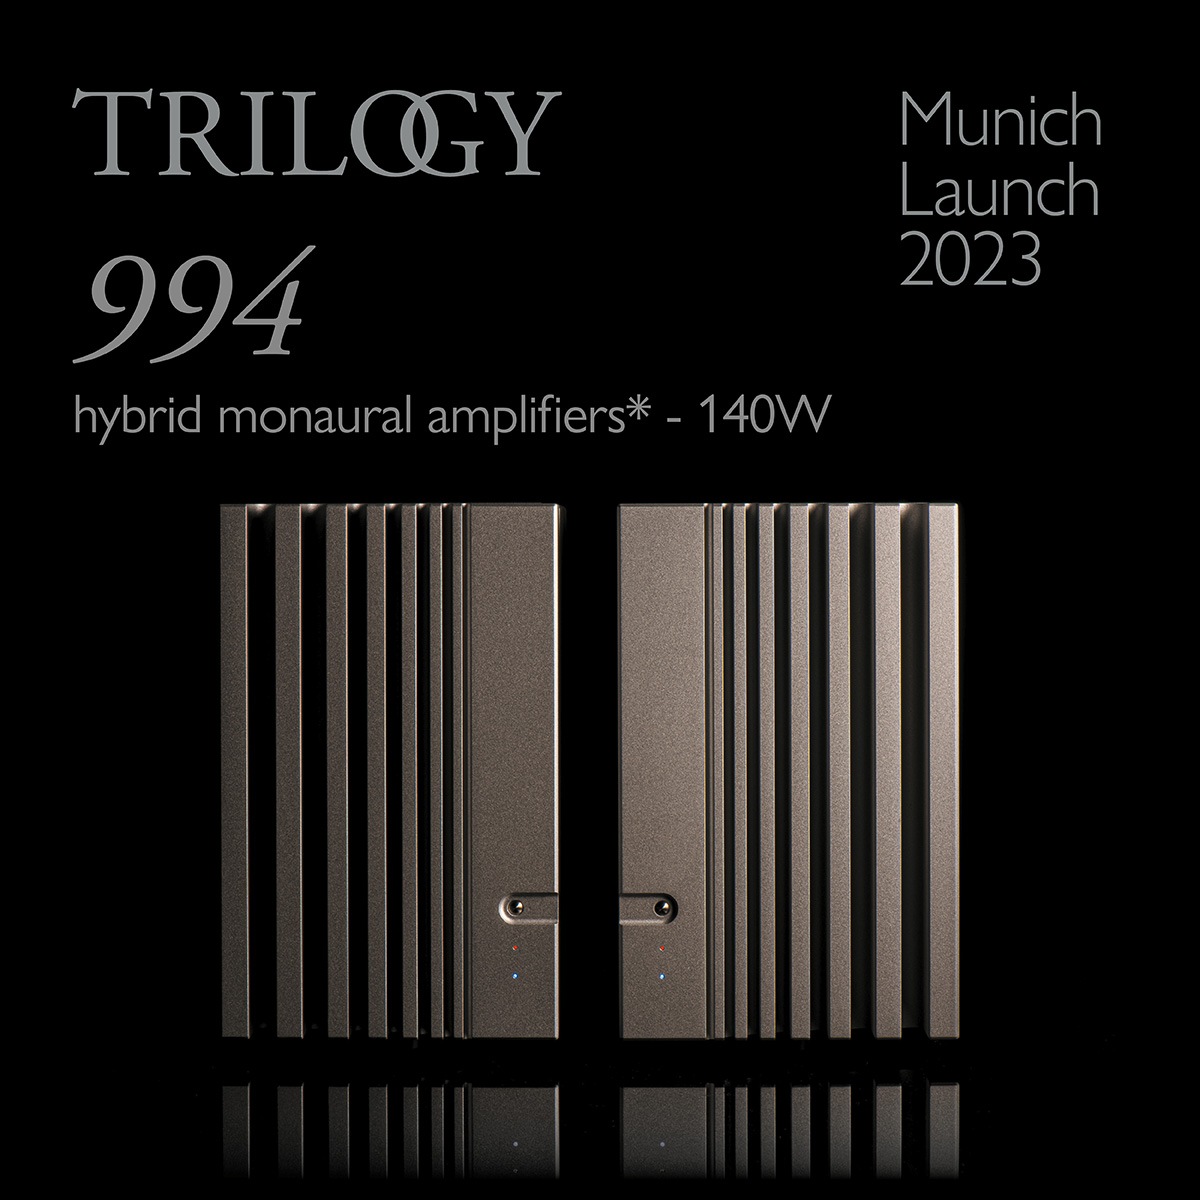 New product launch. The distinctive form of our highly acclaimed 995R monaural amplifiers in a smaller footprint. We look forward to seeing you.
We're at A 4.2, F224. MAY 18 TO 21, 2023  *Shipping Autumn 2023. #audiophile #highendhifi #munichhighend2023 #madeinbritain